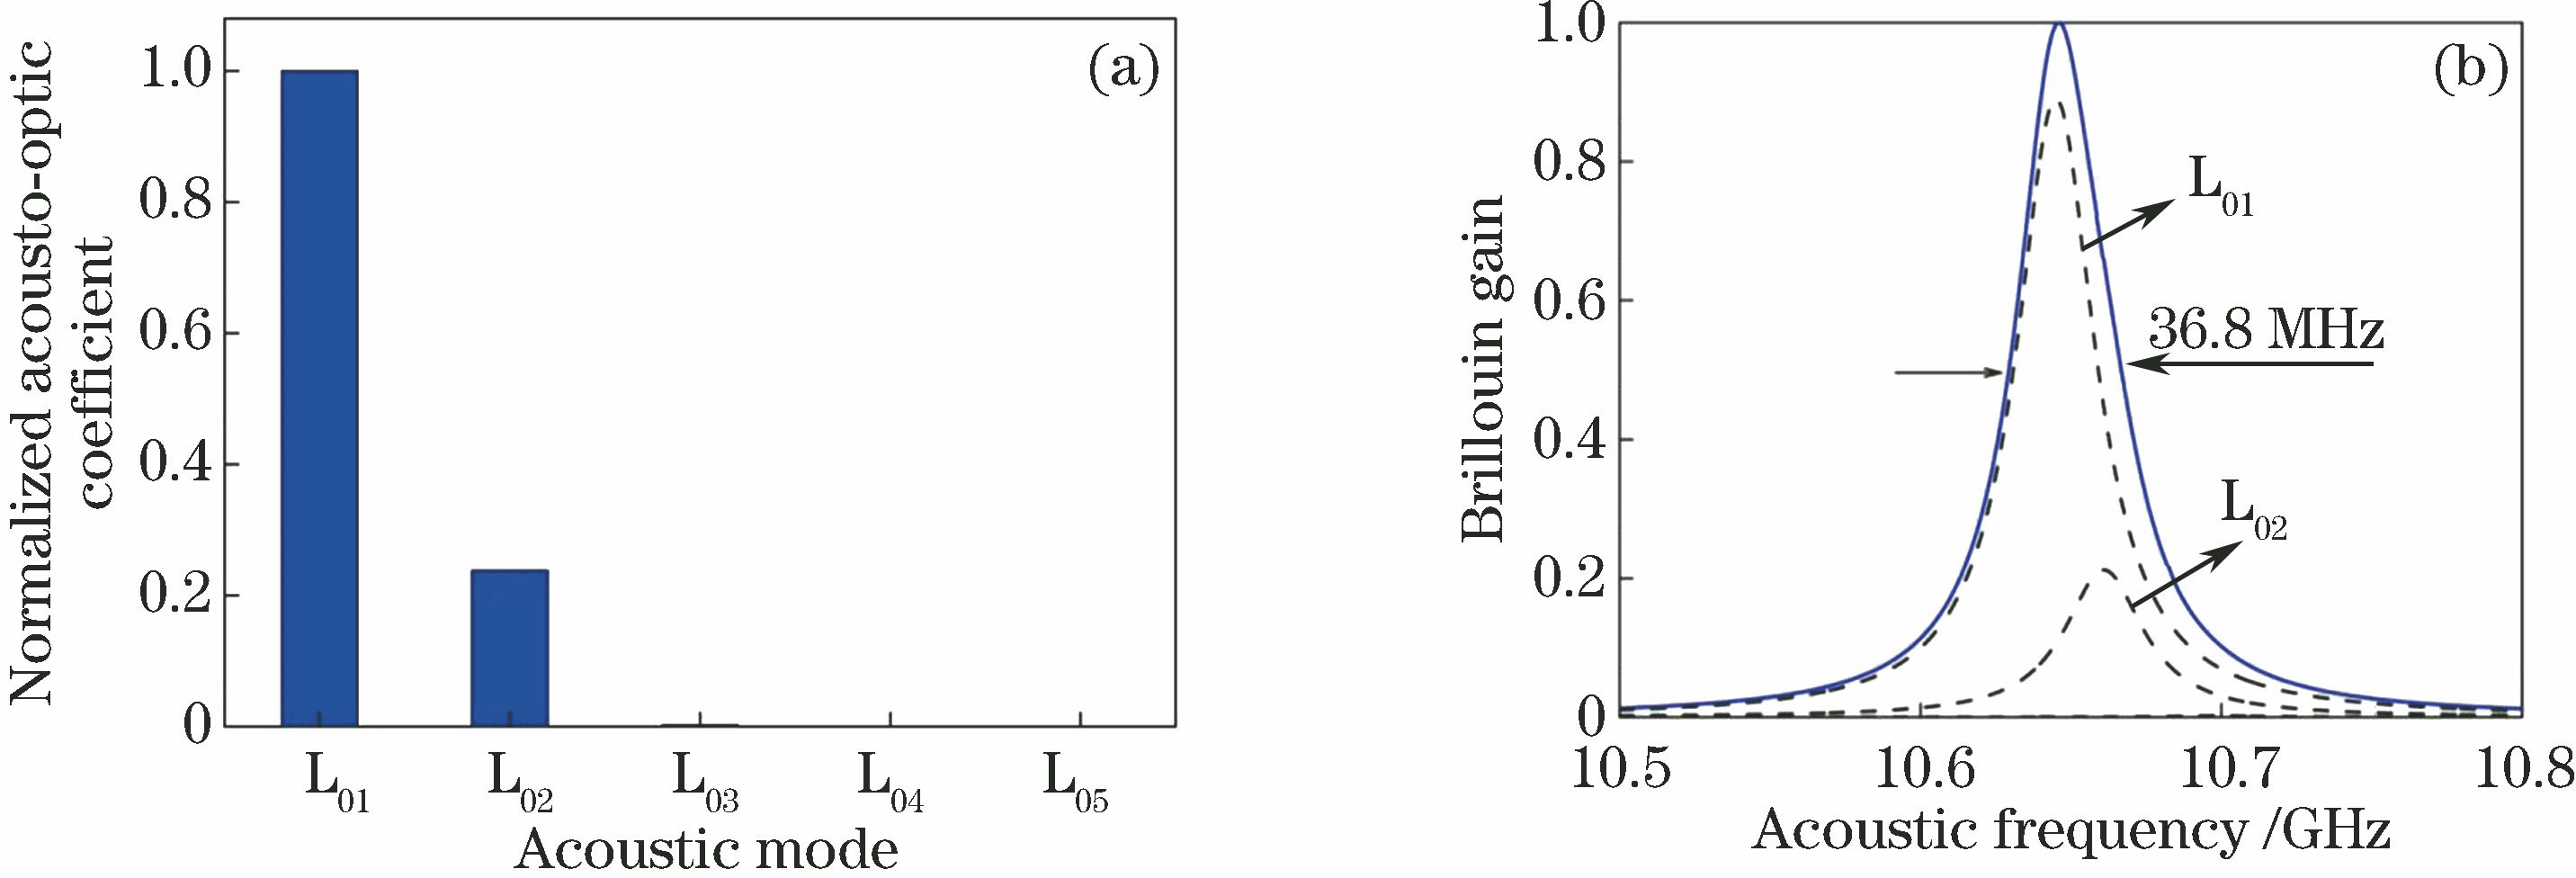 Acousto-optic coefficients and Brillouin gain spectra of LP01-LP01 mode pair. (a) Normalized acousto-optic coefficients; (b) Brillouin gain spectra